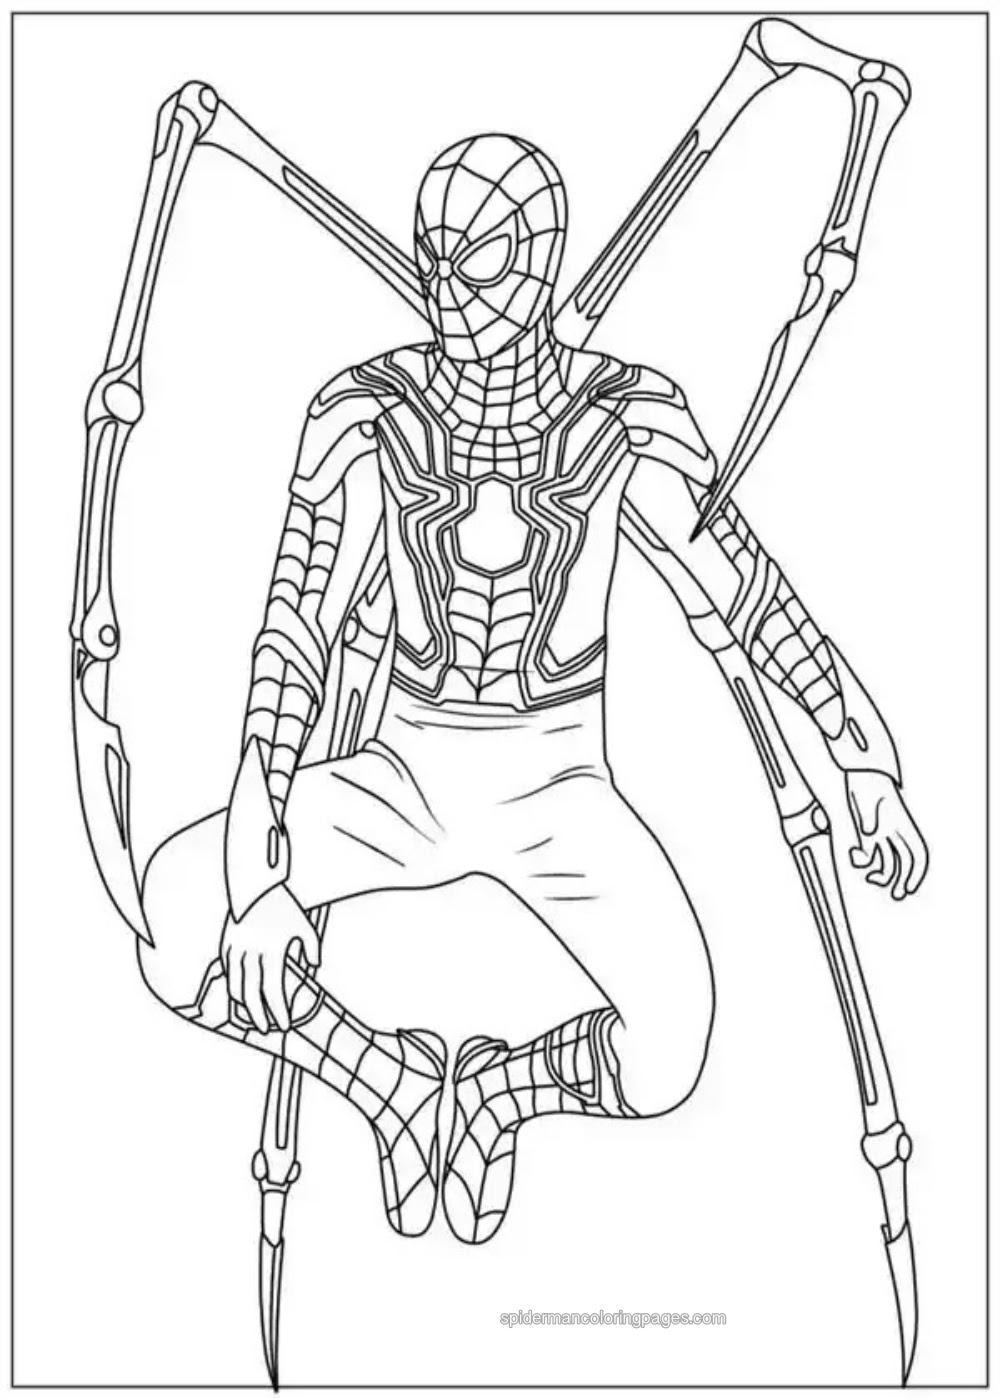 Á spiderman coloring pages â free printable sheets for kids